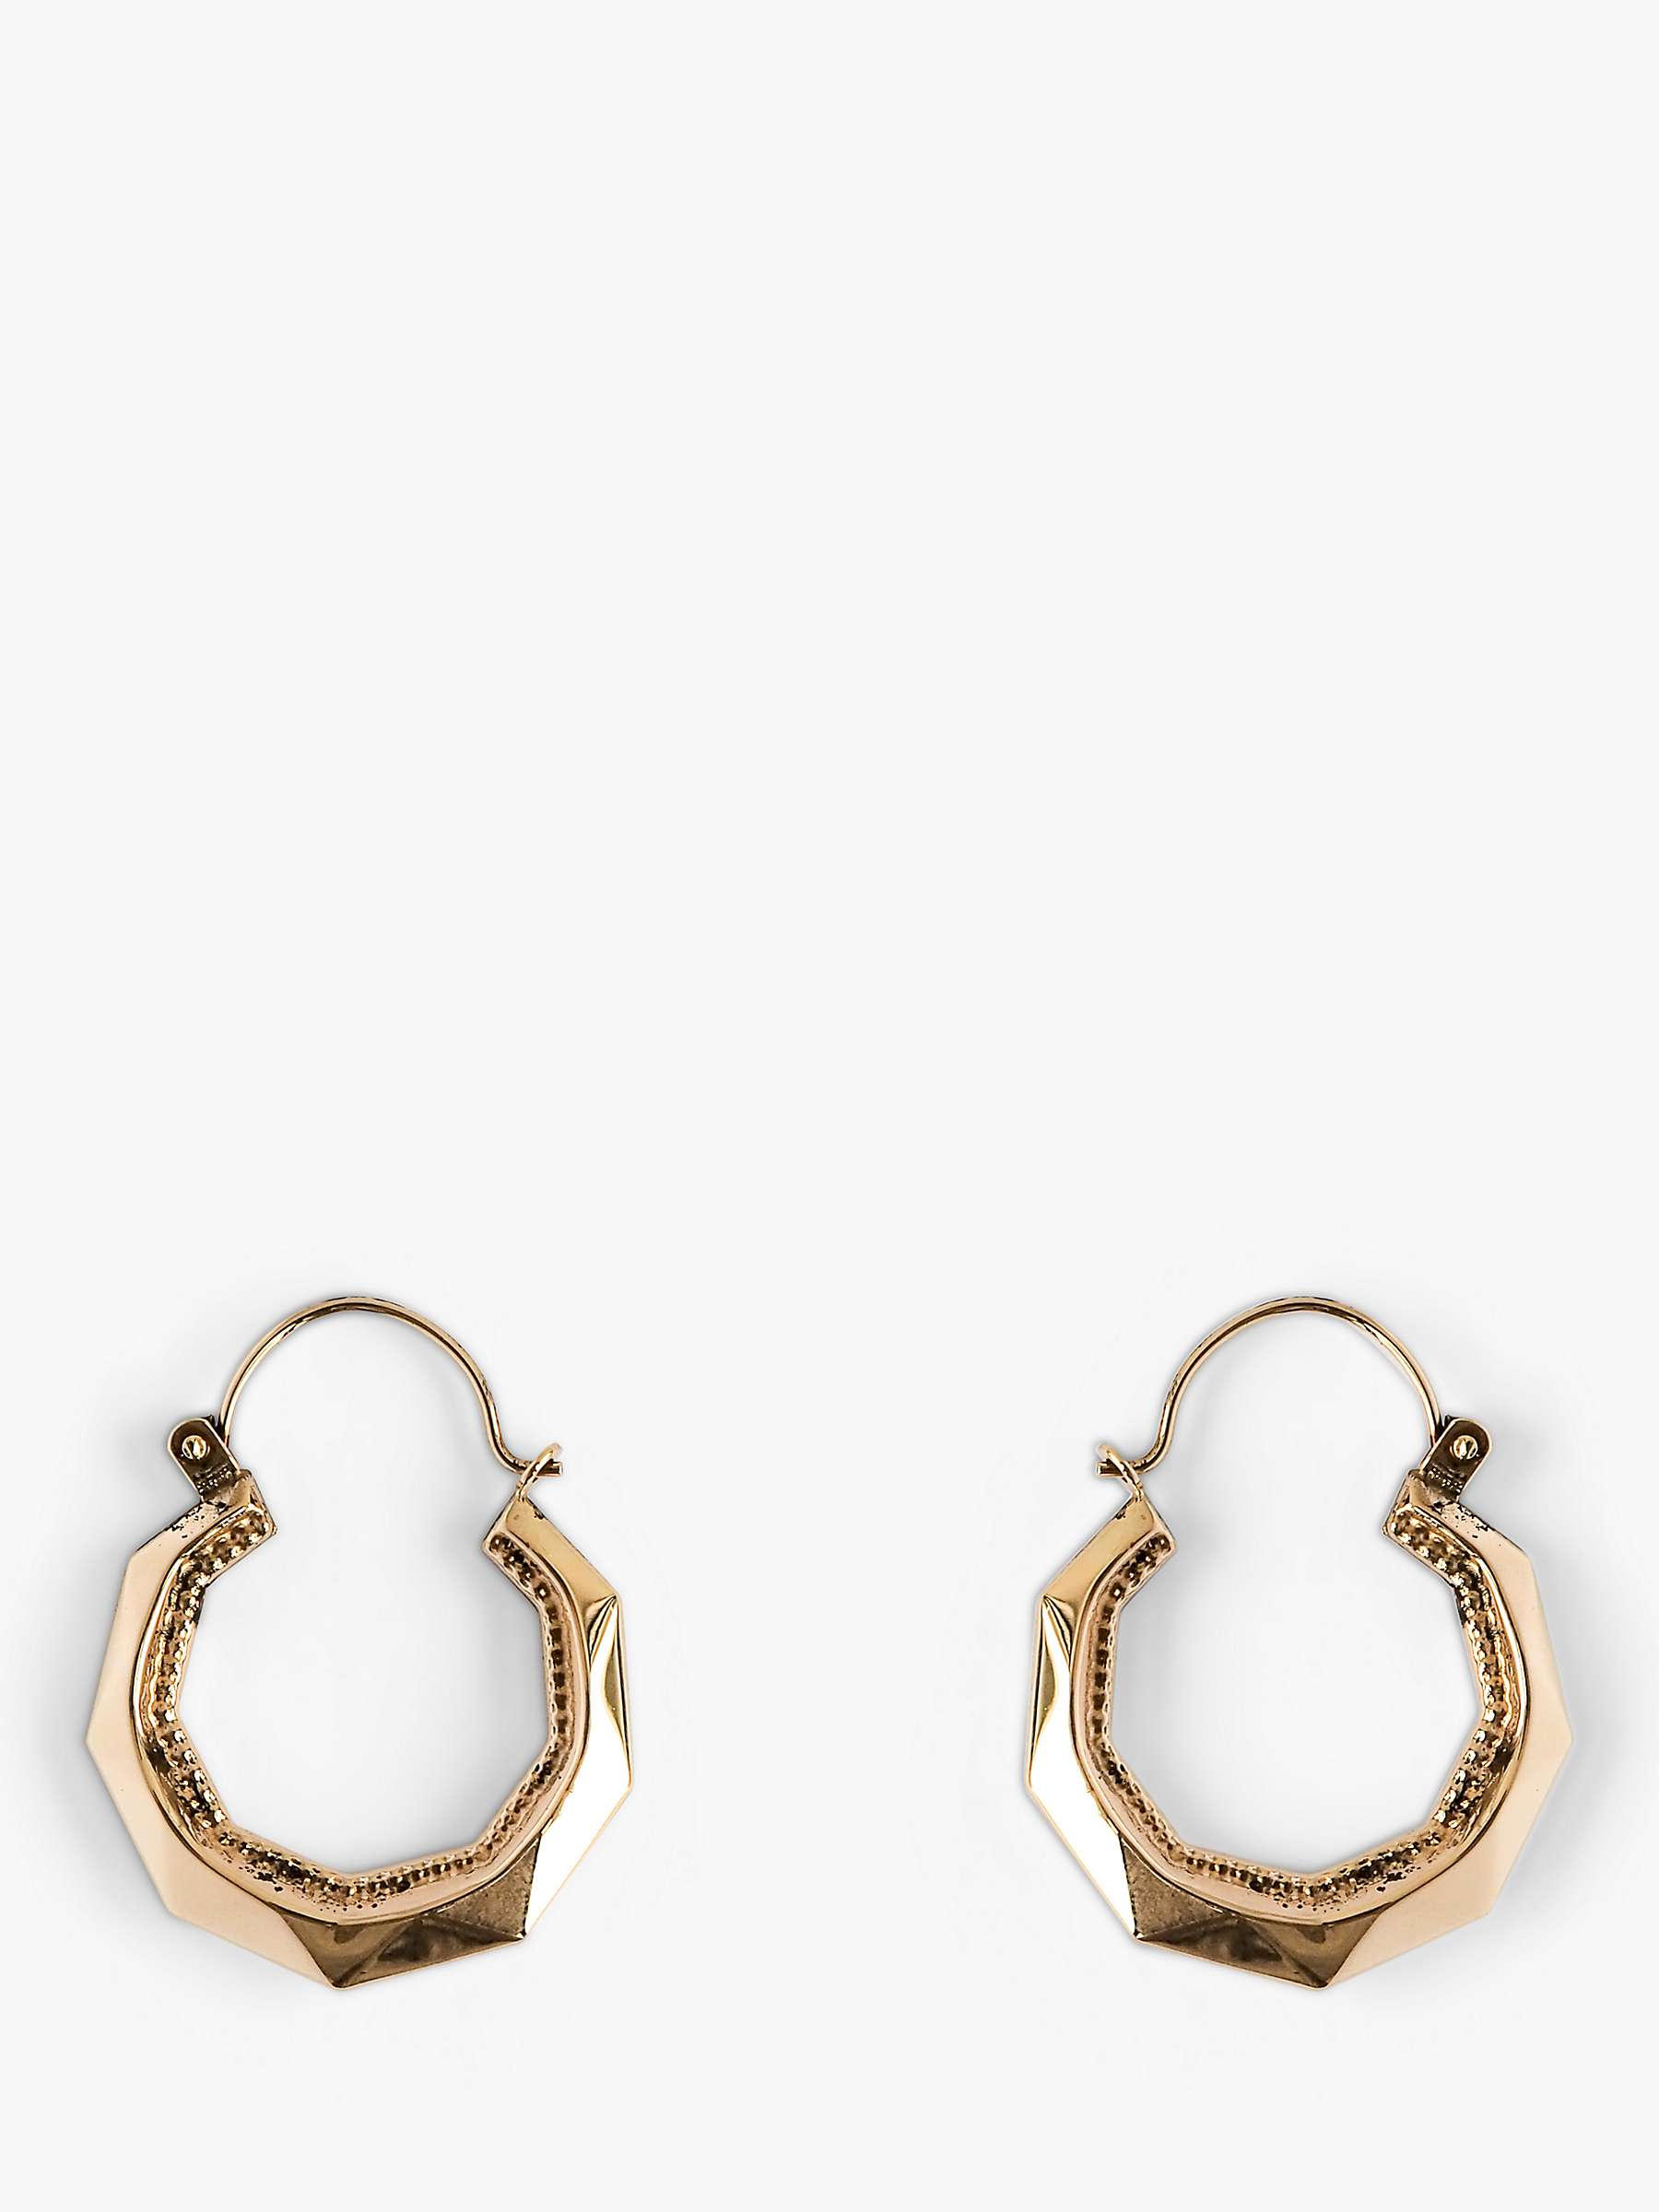 Buy L & T Heirlooms Second Hand 9ct Yellow Gold Patterned Creole Hoop Earrings, Gold Online at johnlewis.com